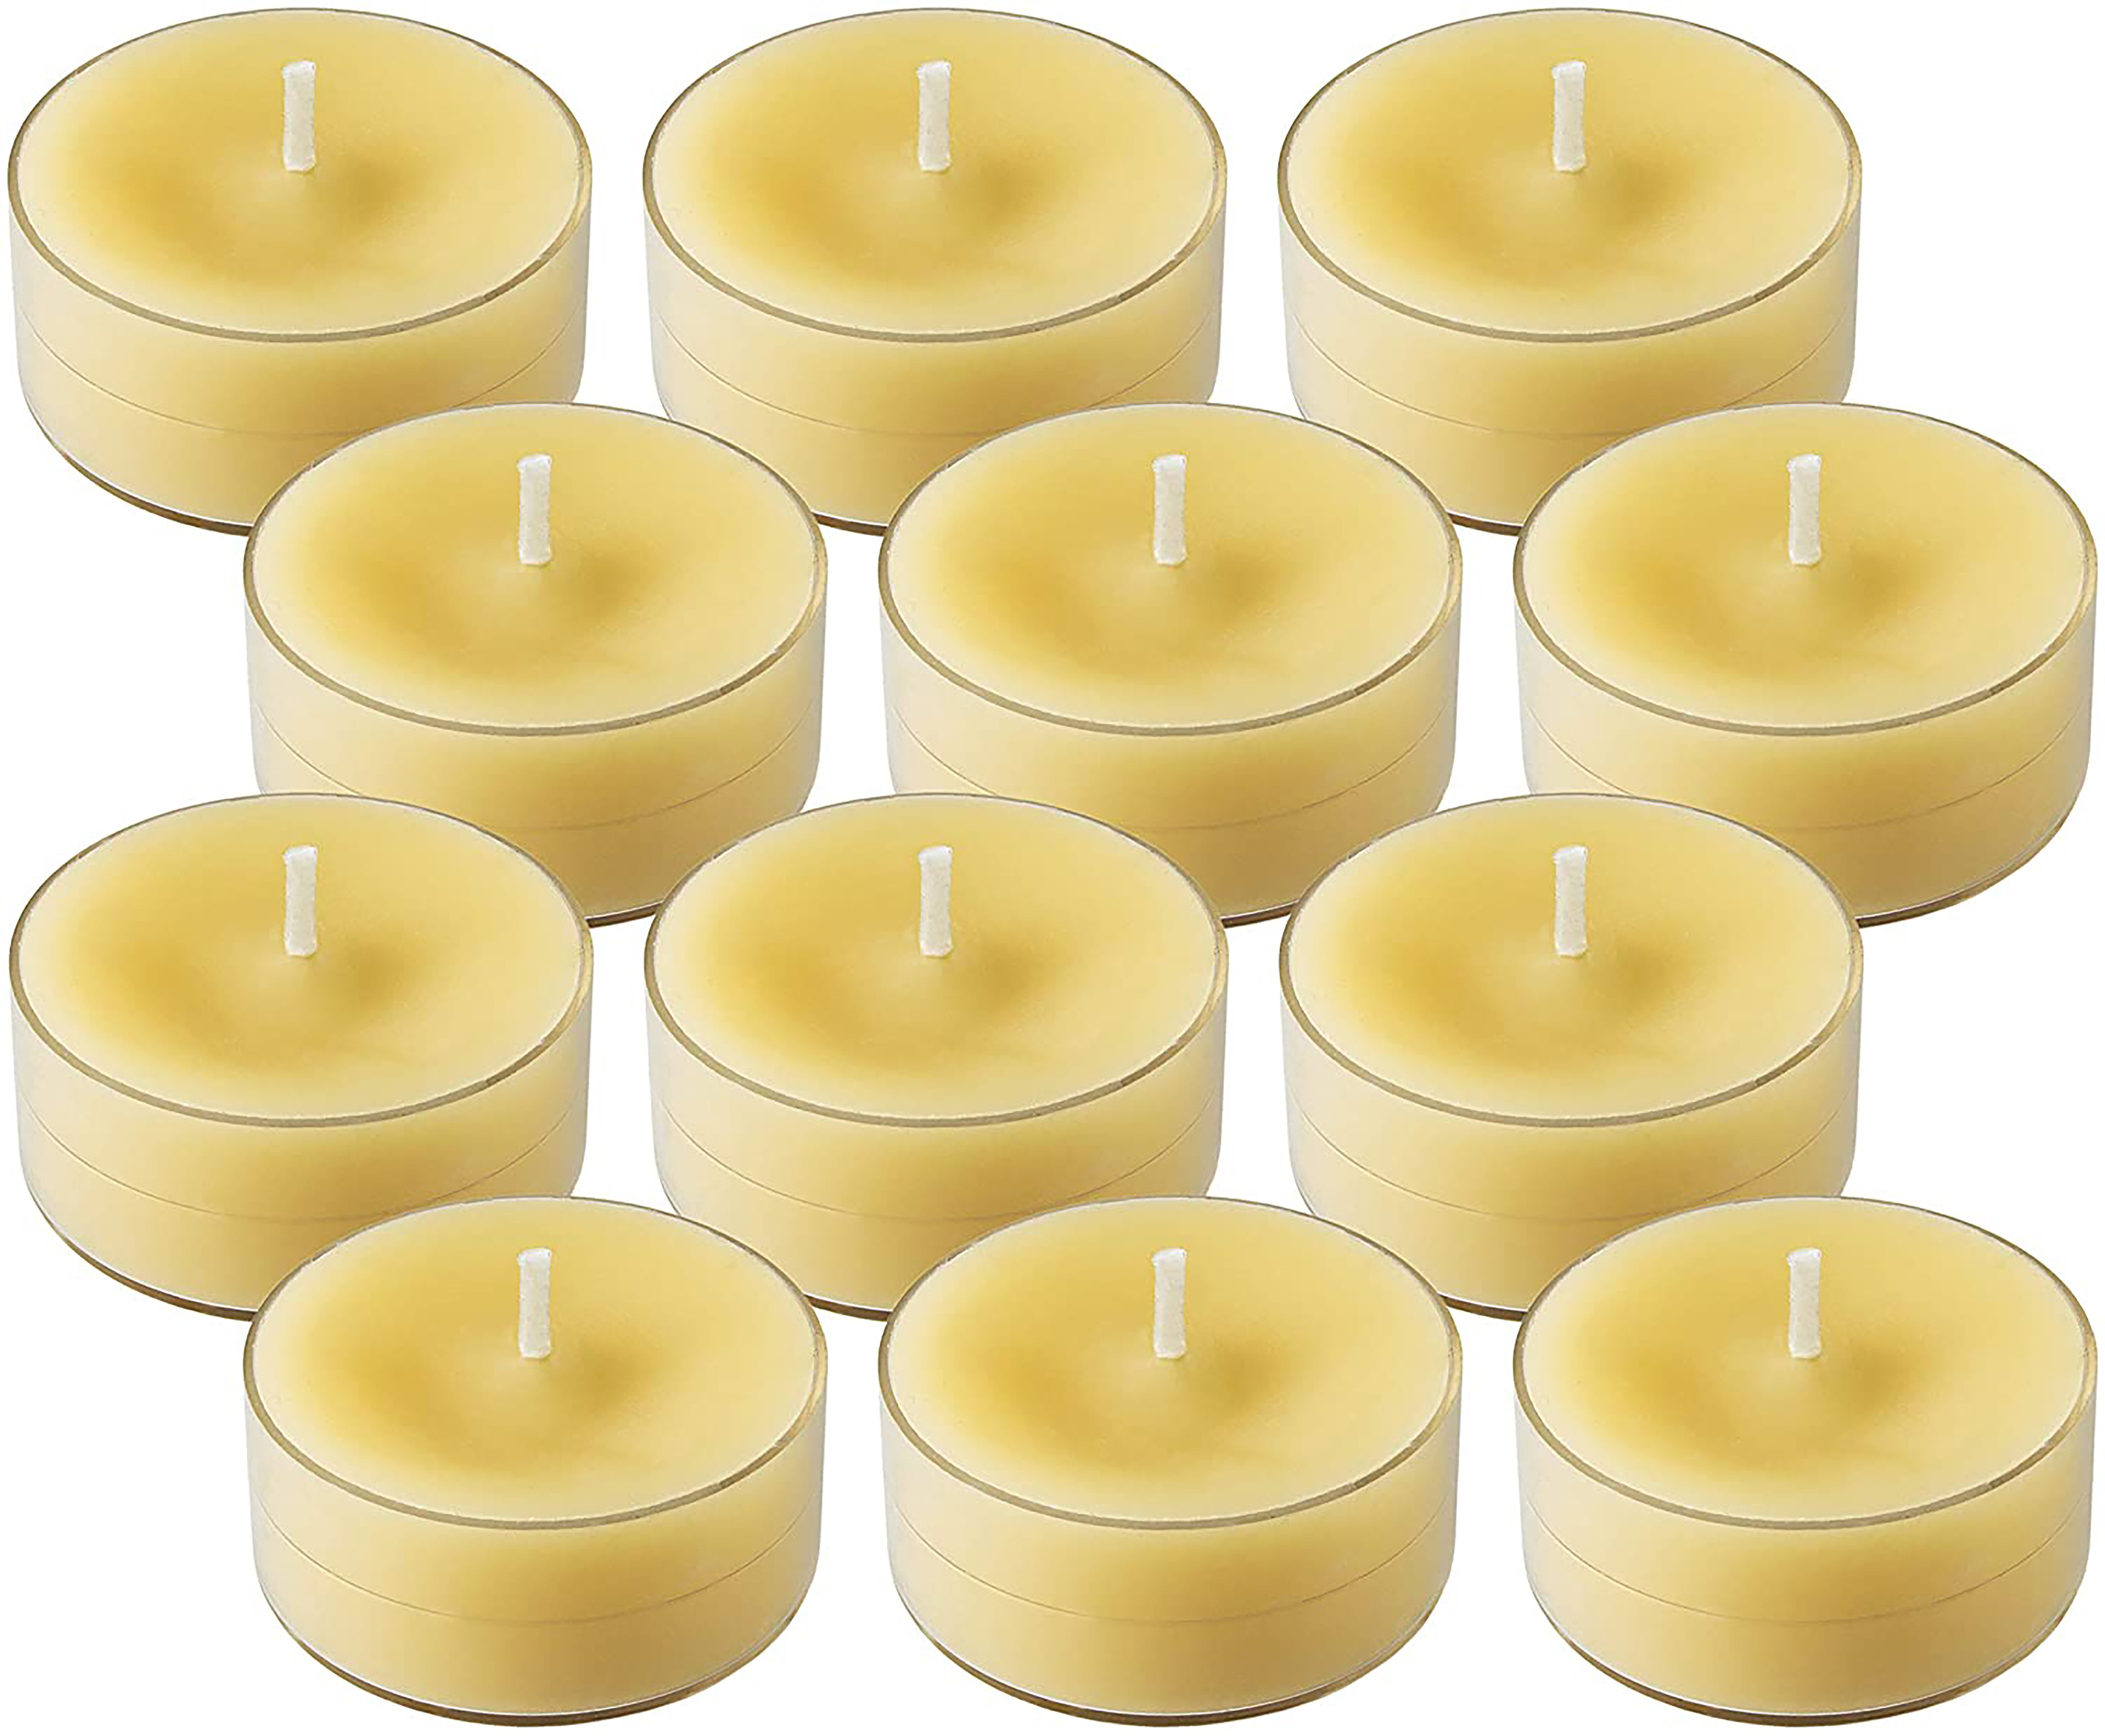 Are Candles Bad for You? From Scented to Unscented - Molekule